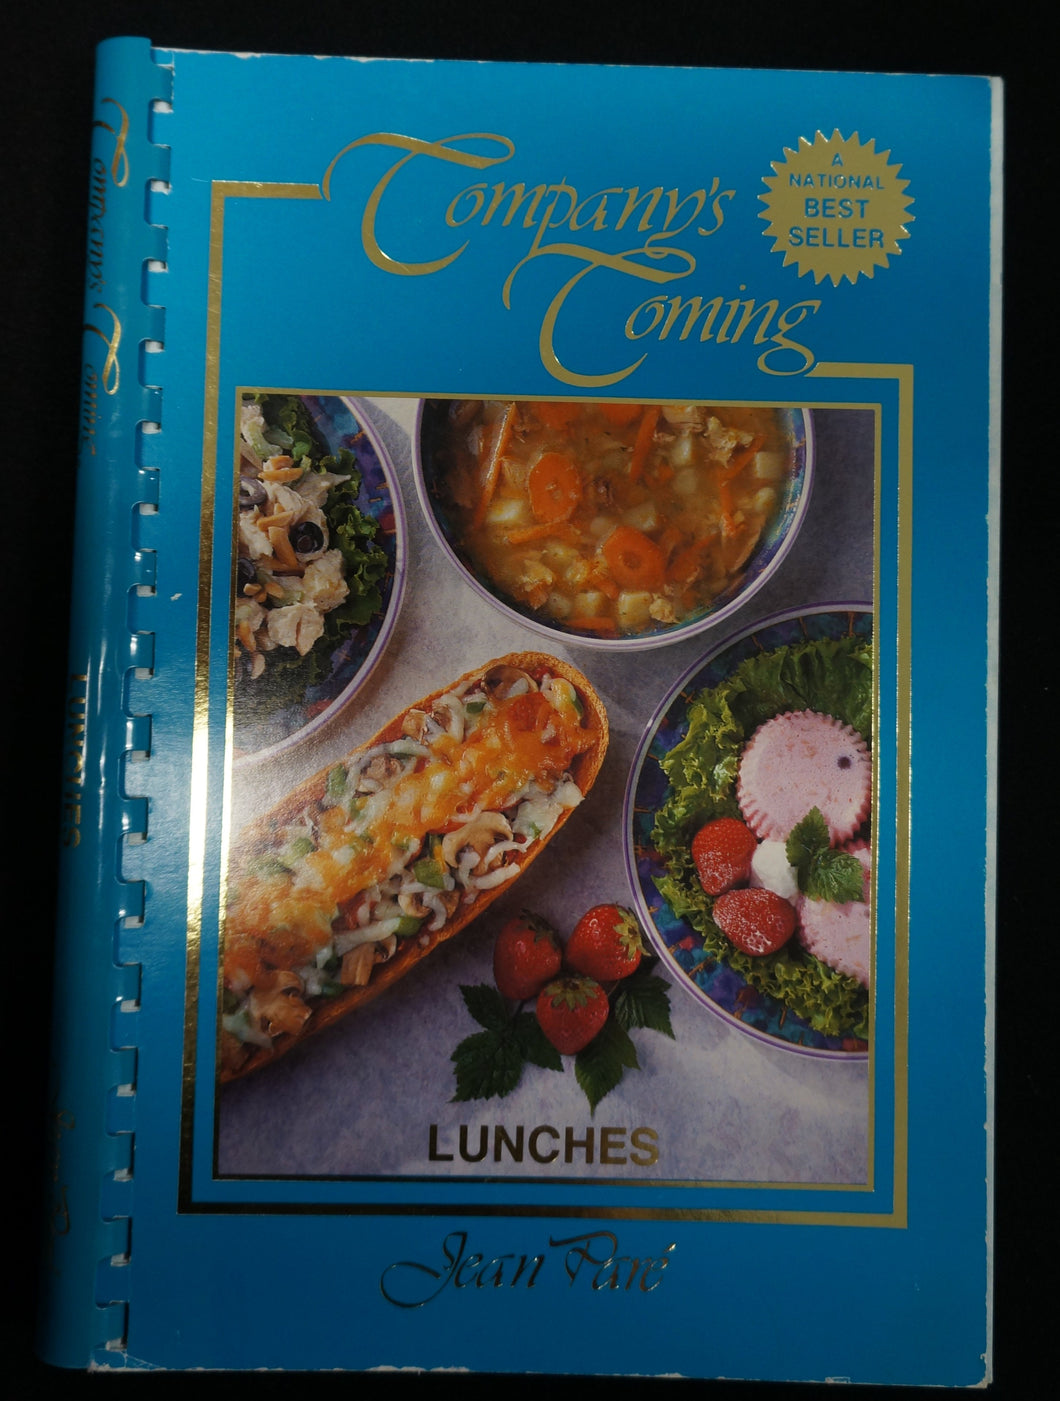 Company's Coming - Lunches